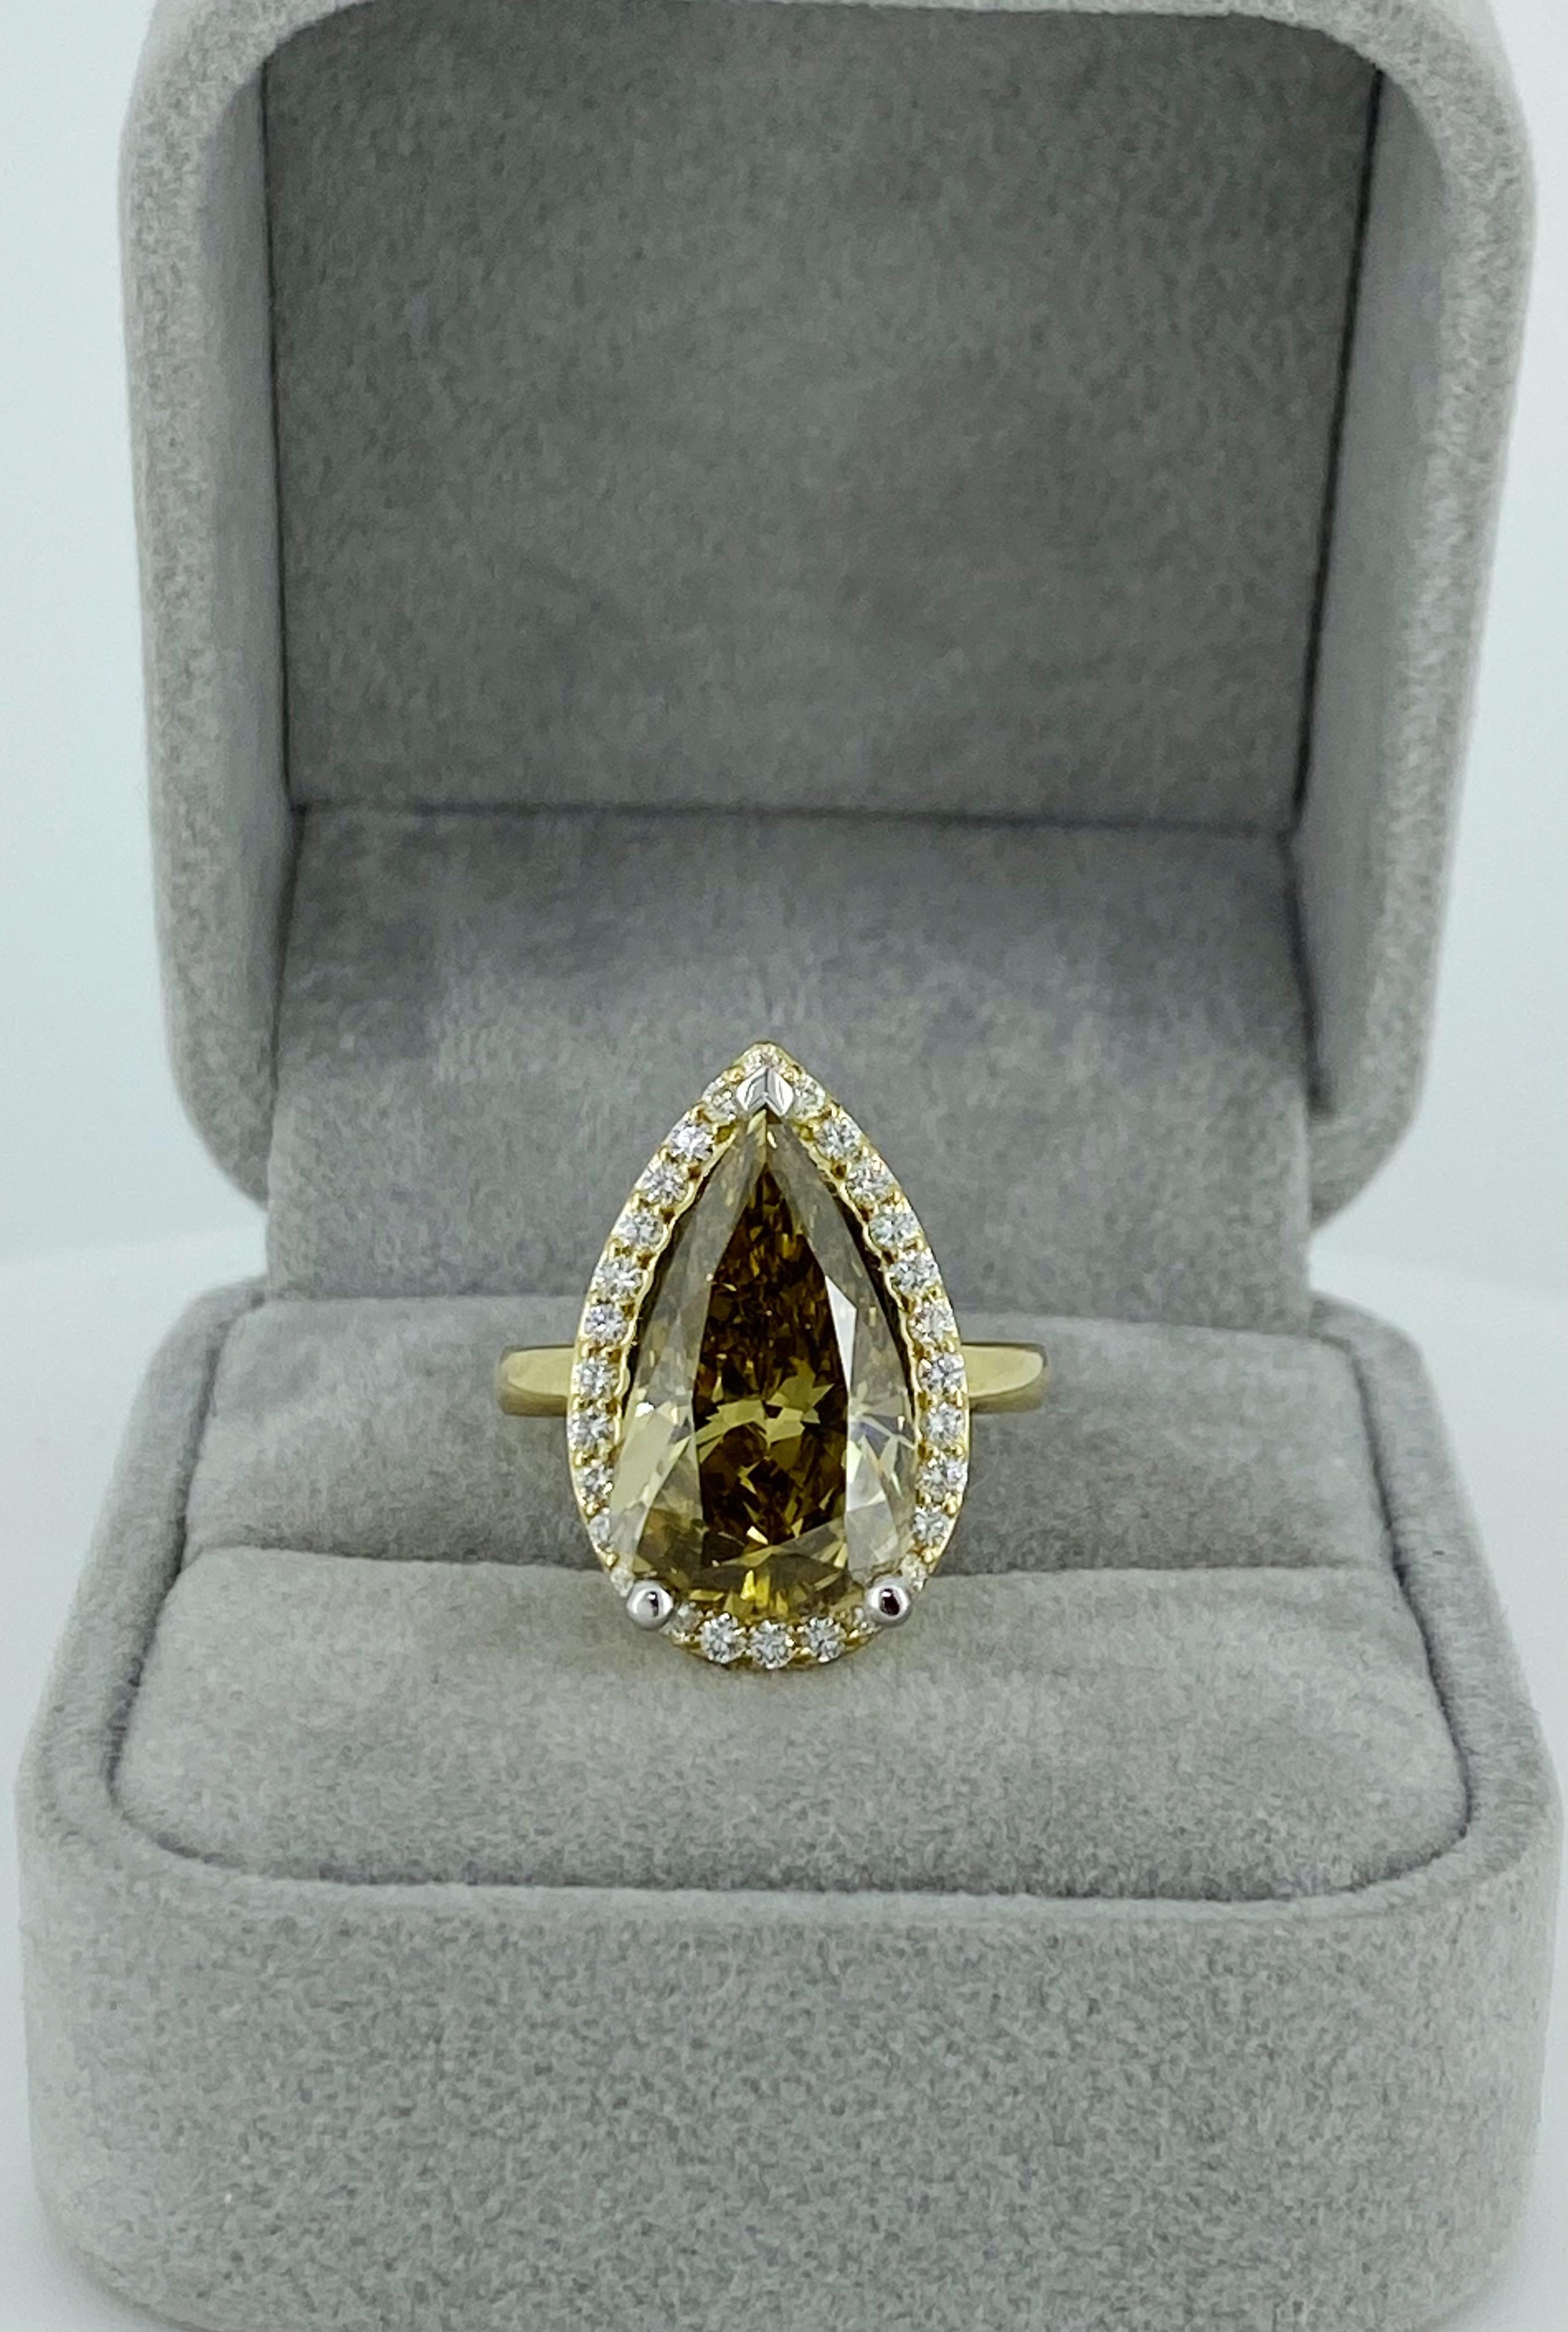 6.36ct Fancy Brownish Yellow Natural Pear Cut Diamond Ring in 18K Yellow Gold For Sale 6